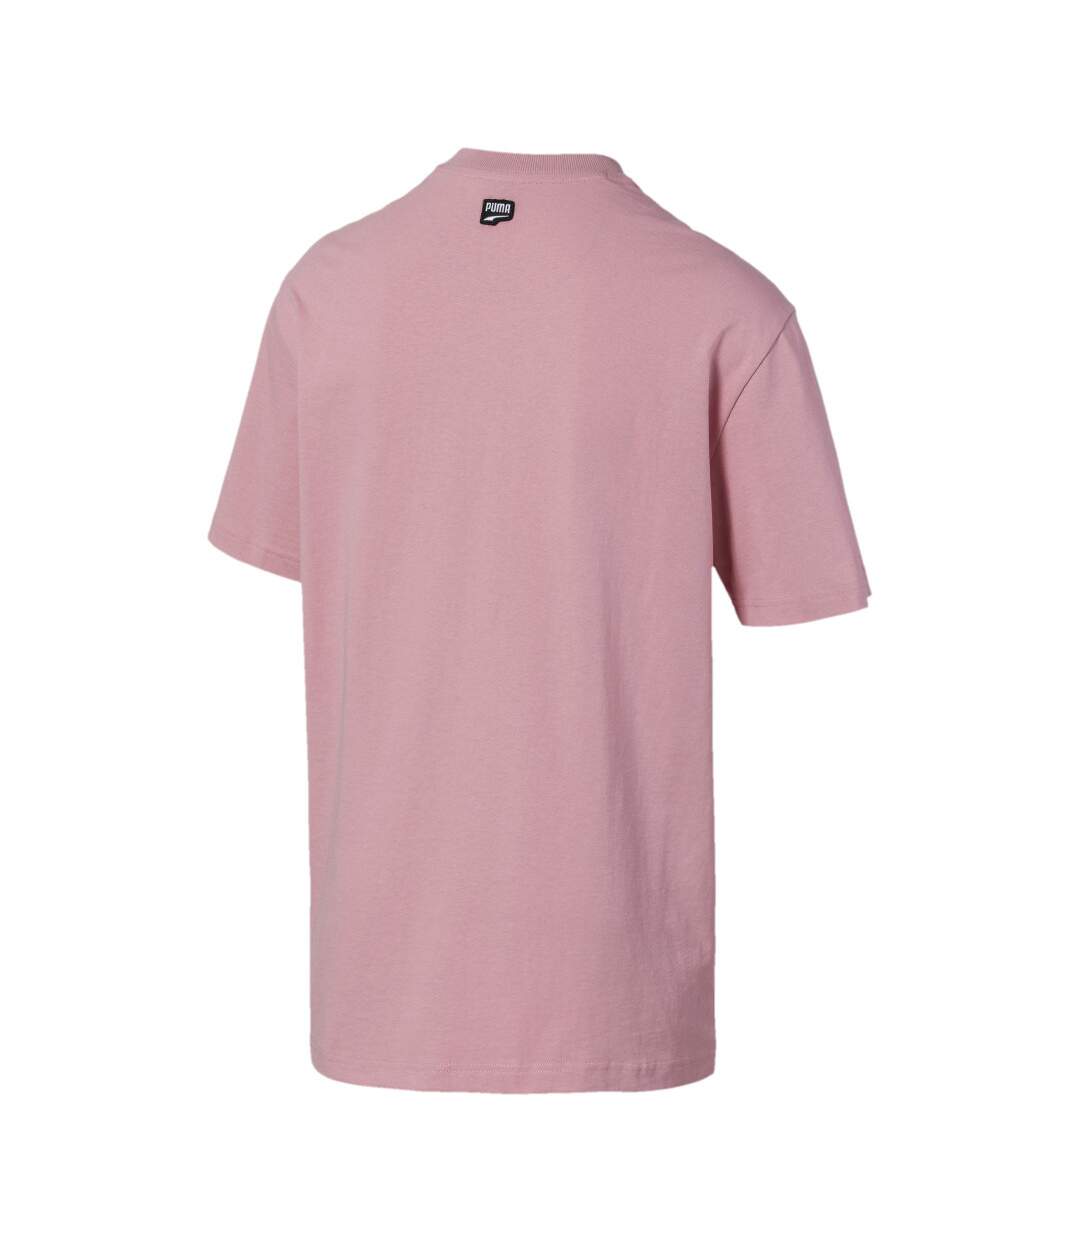 T-Shirt rose homme Puma Downtown Graphic Tee Brid